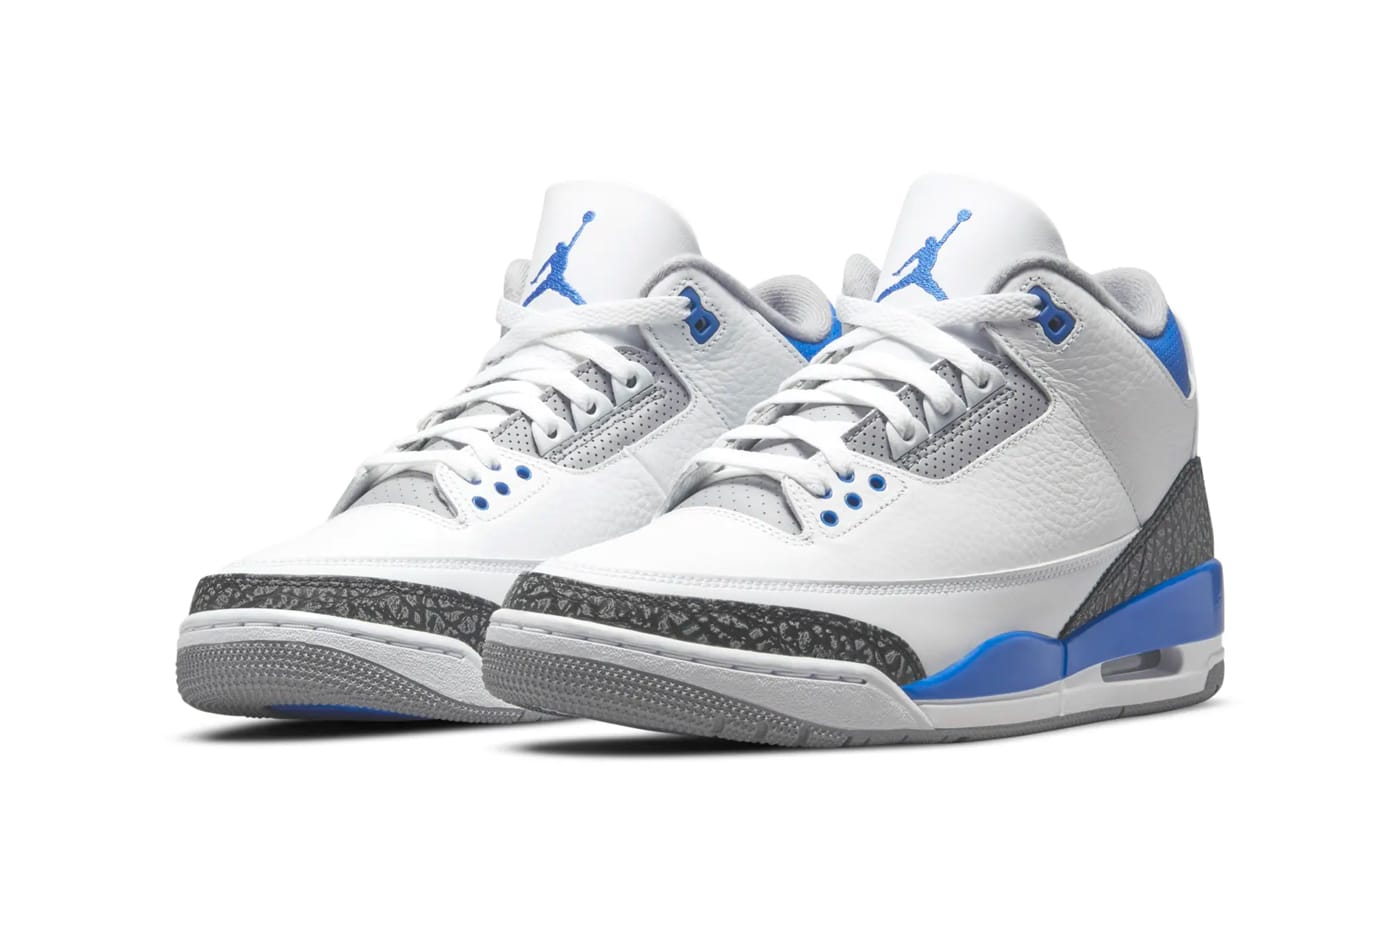 blue and white jordans 3 release date